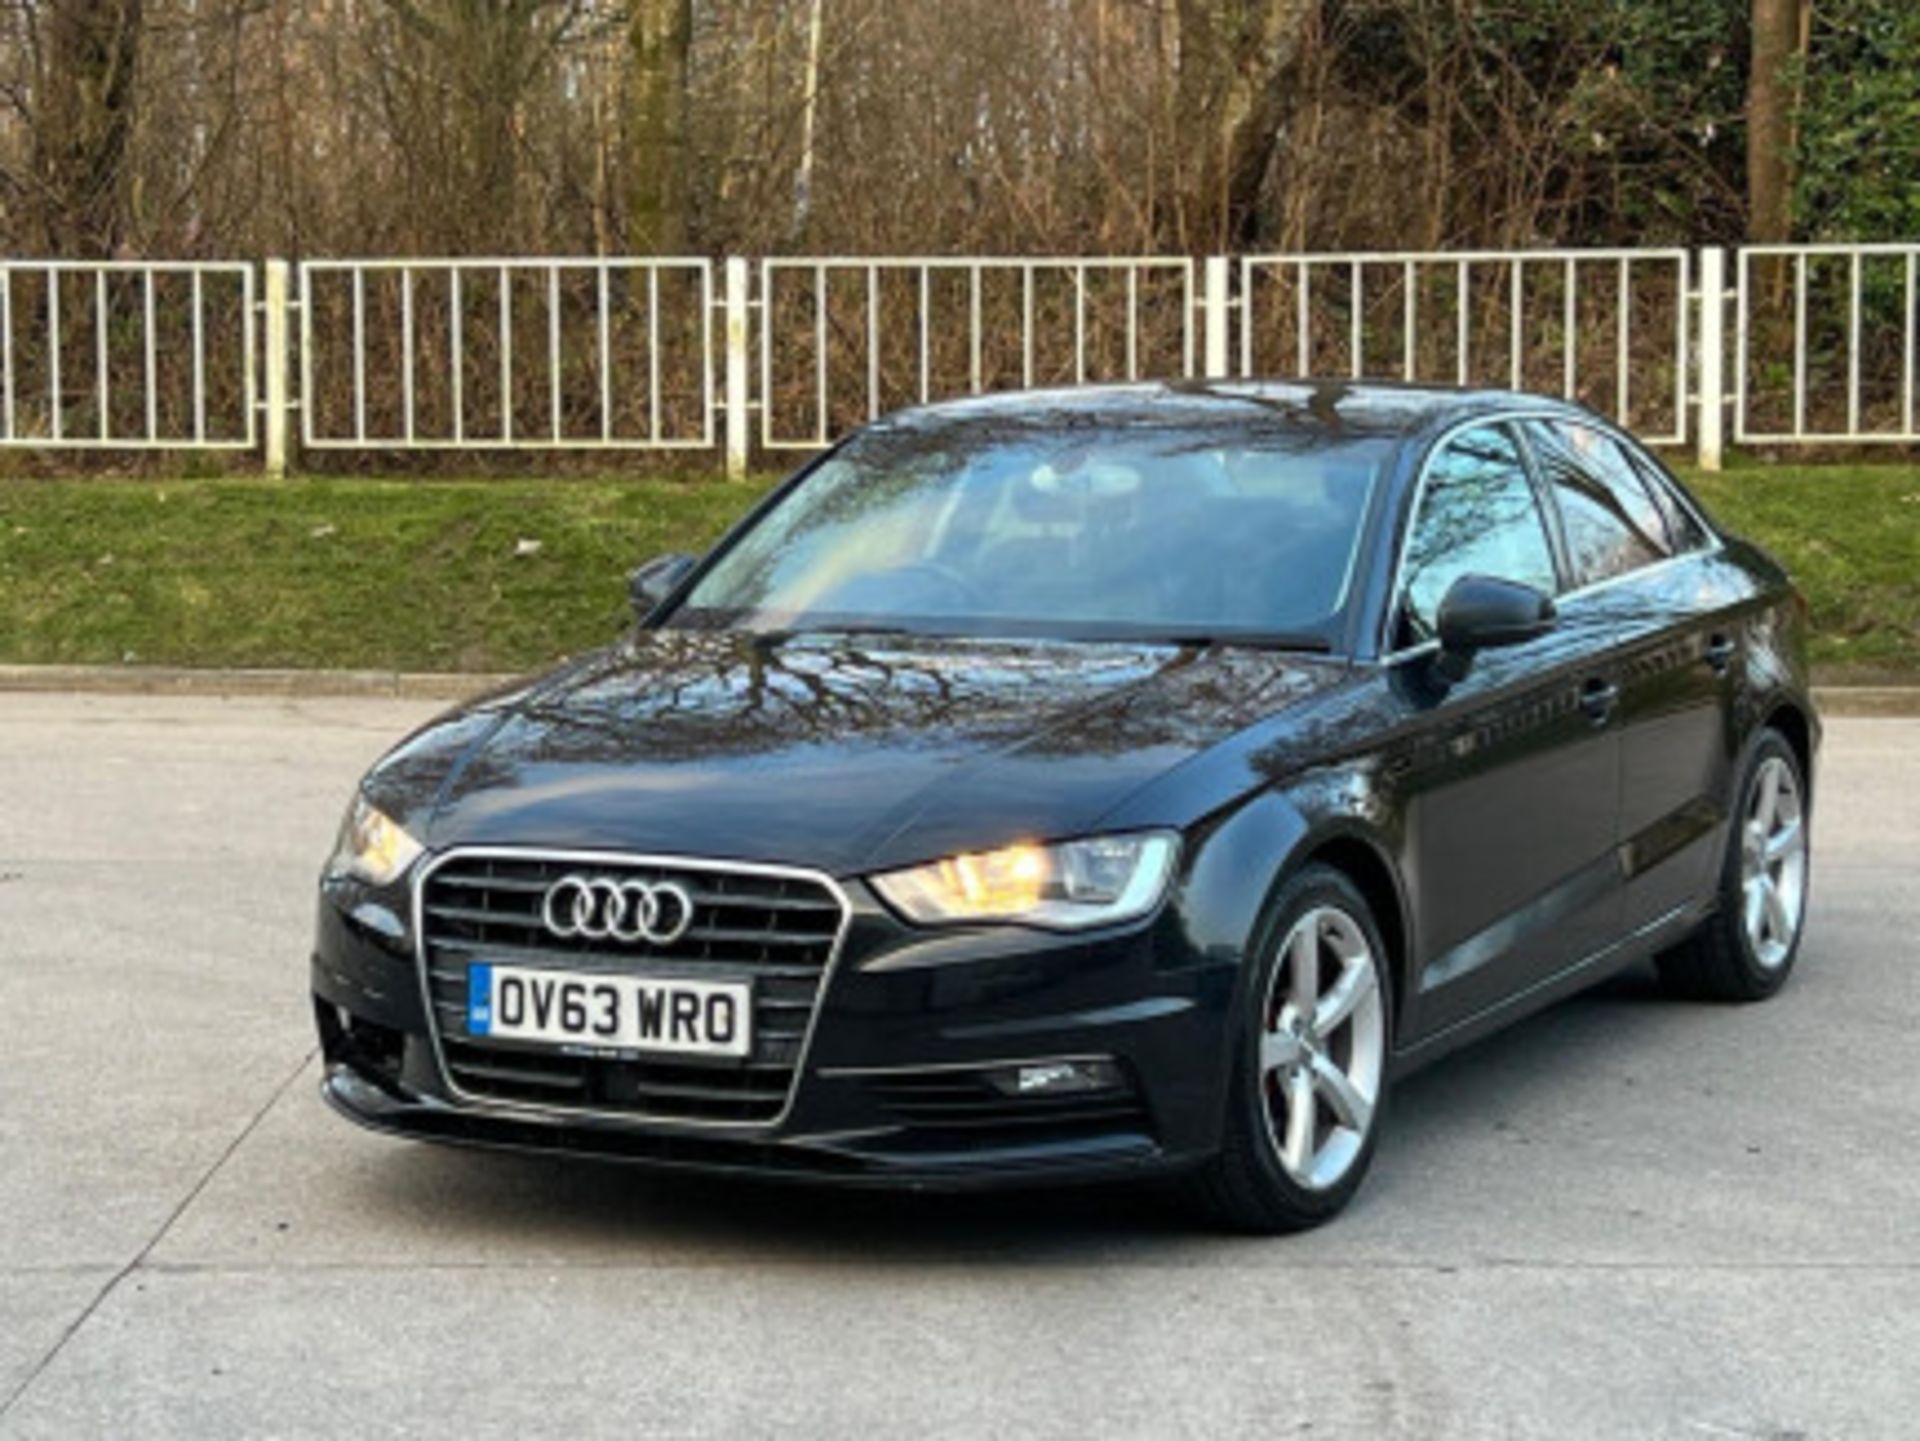 AUDI A3 2.0TDI SPORTBACK - STYLE, PERFORMANCE, AND COMFORT COMBINED >>--NO VAT ON HAMMER--<< - Image 108 of 216